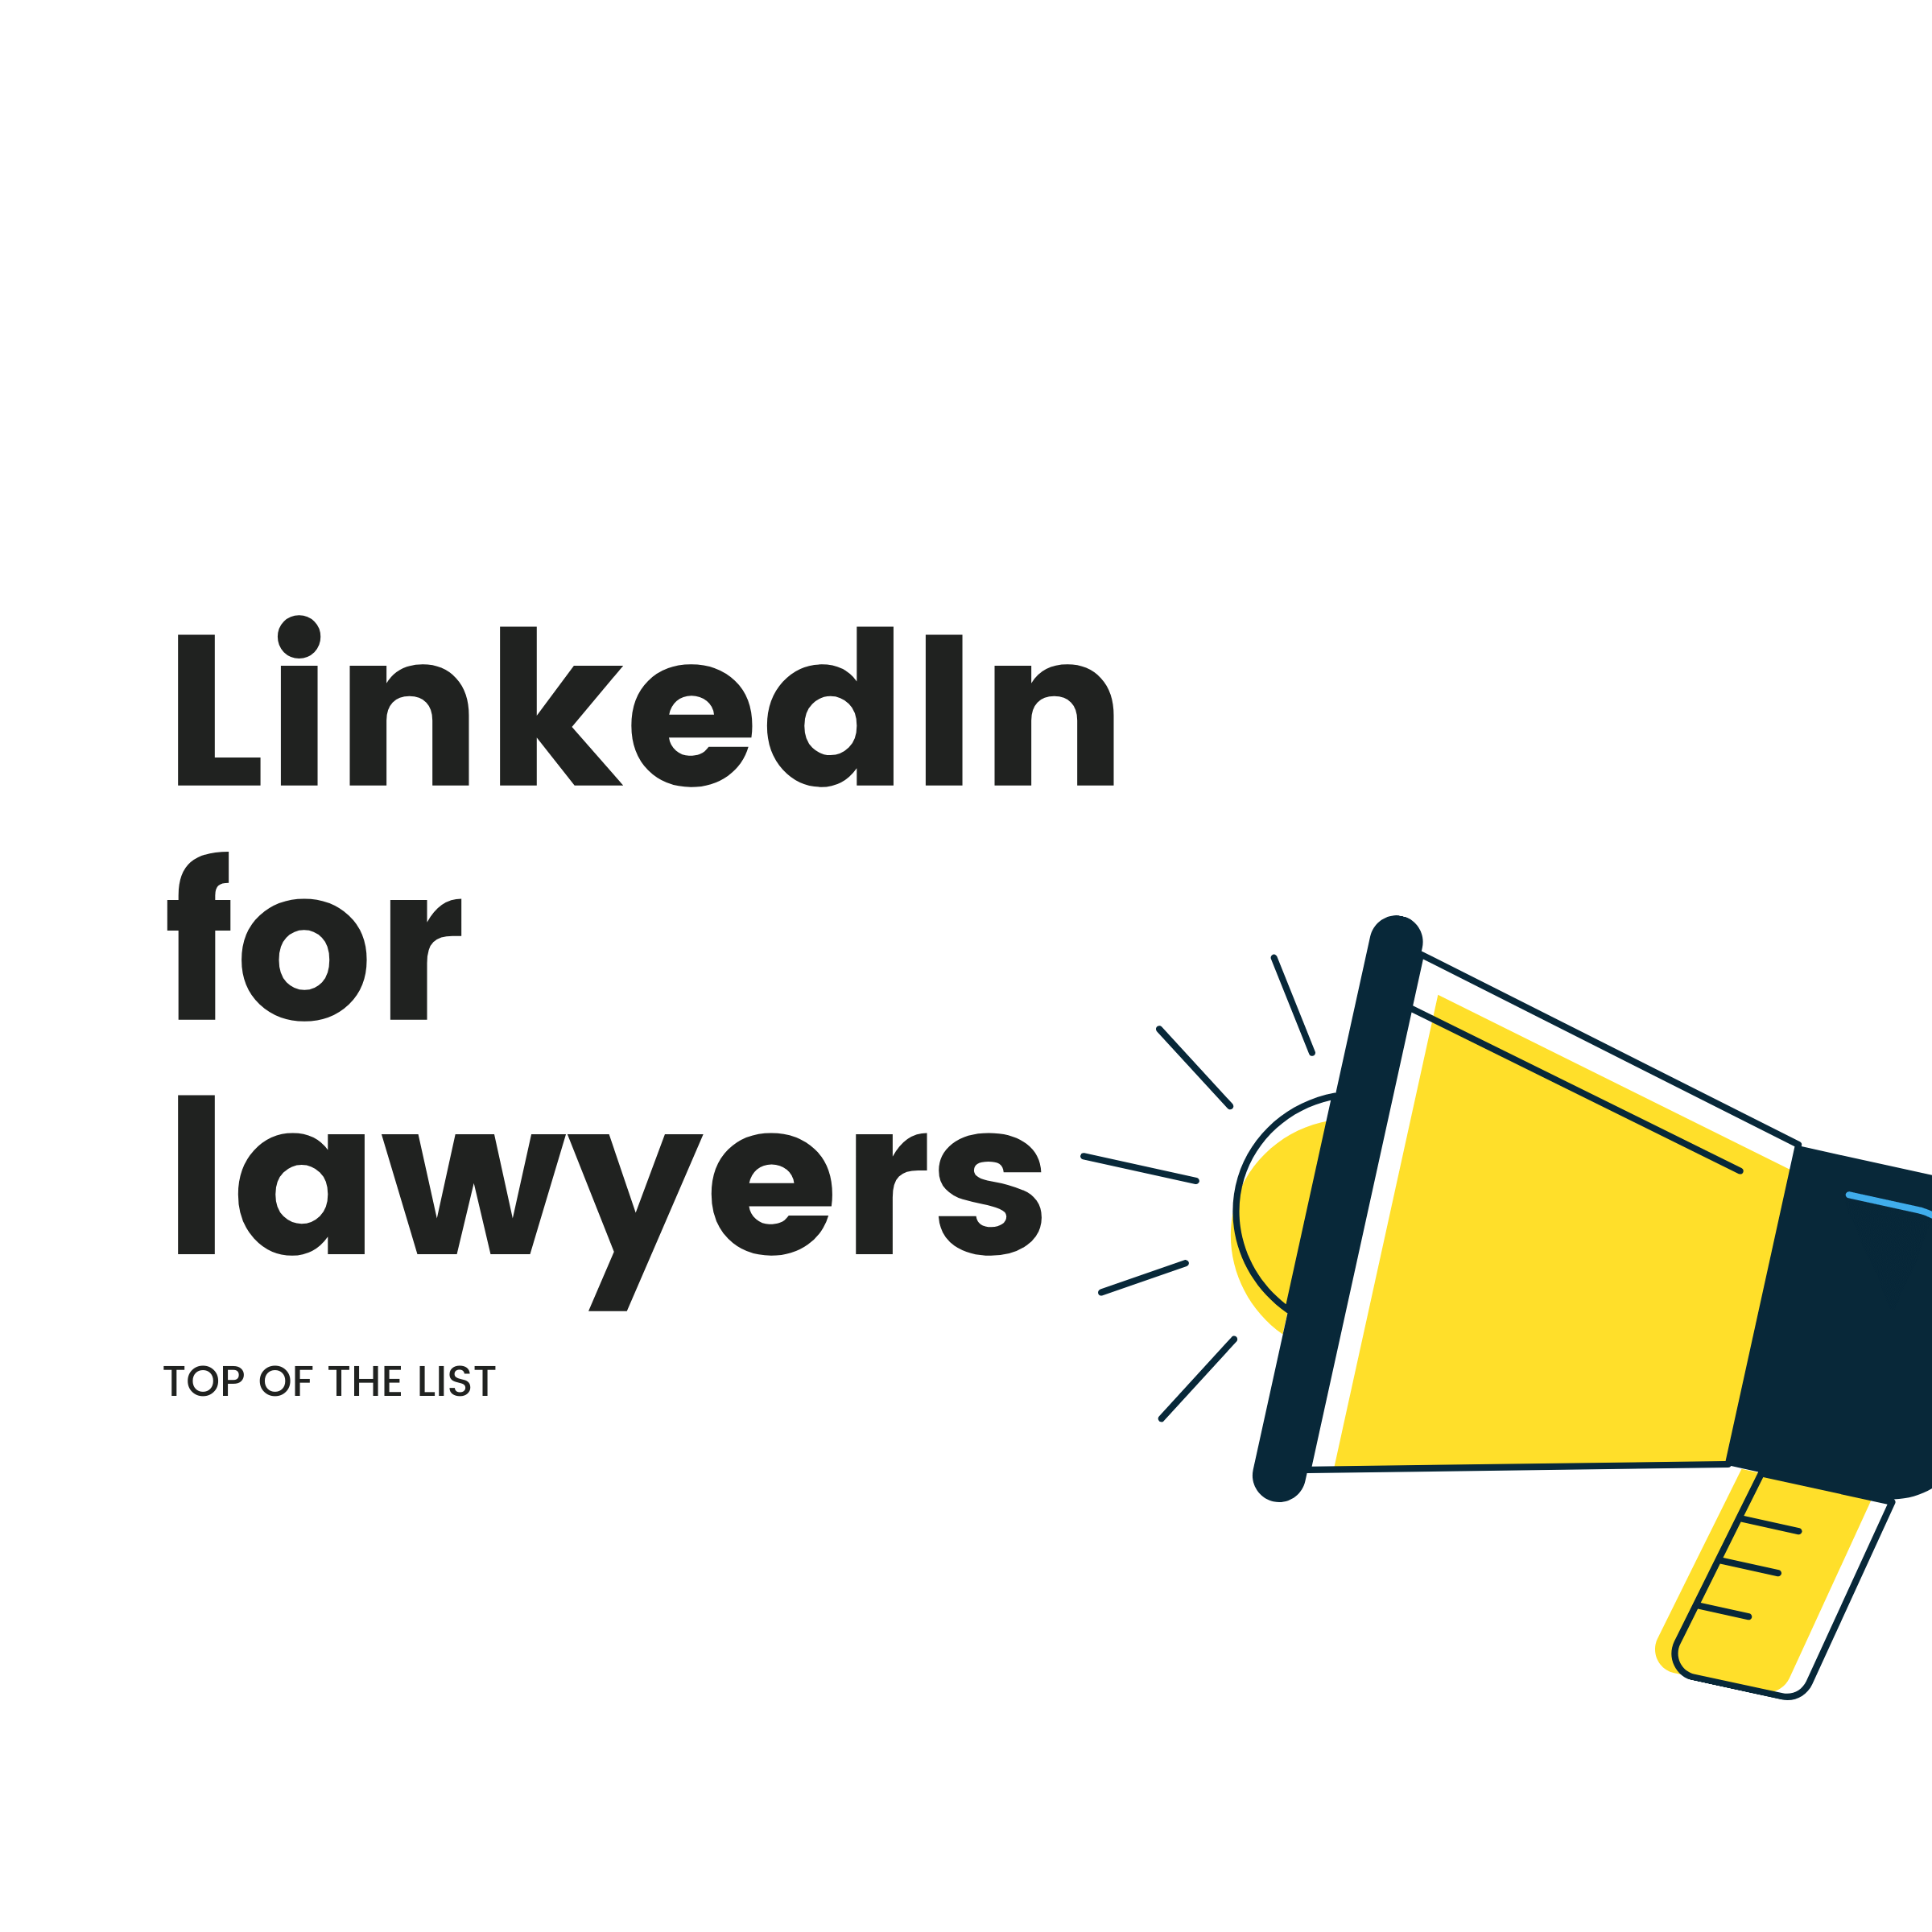 5 ways lawyers can use LinkedIn effectively